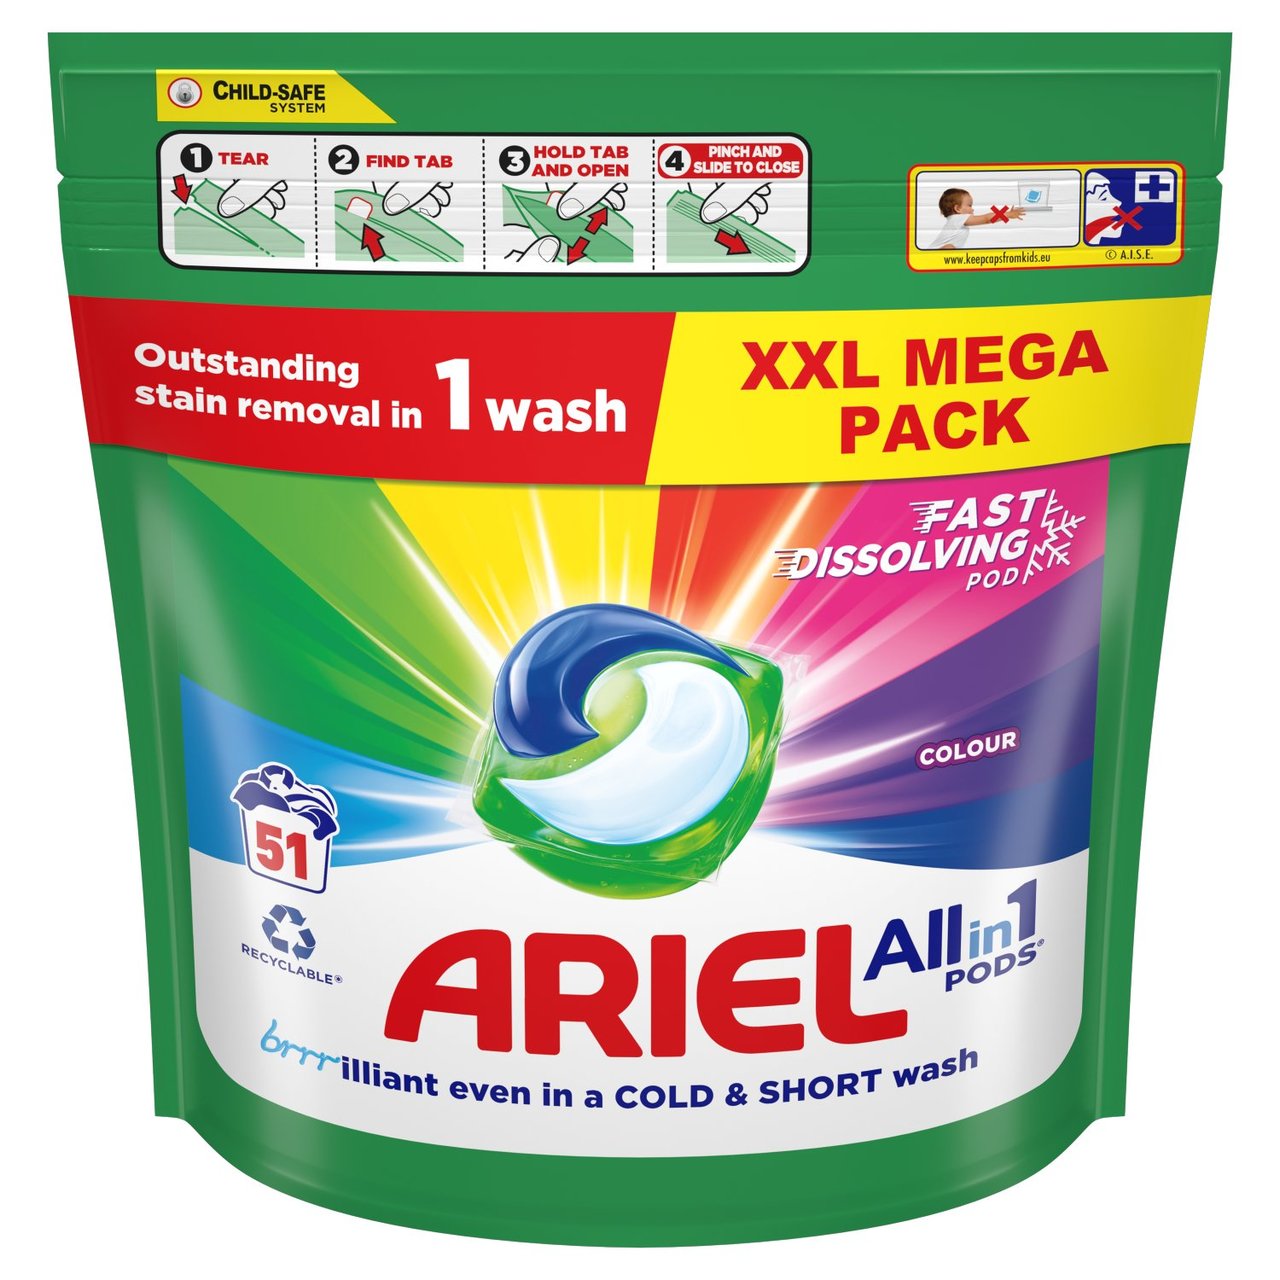 Ariel Colour All-in-1 Pods Washing Liquid Capsules 51 Washes 51 per pack